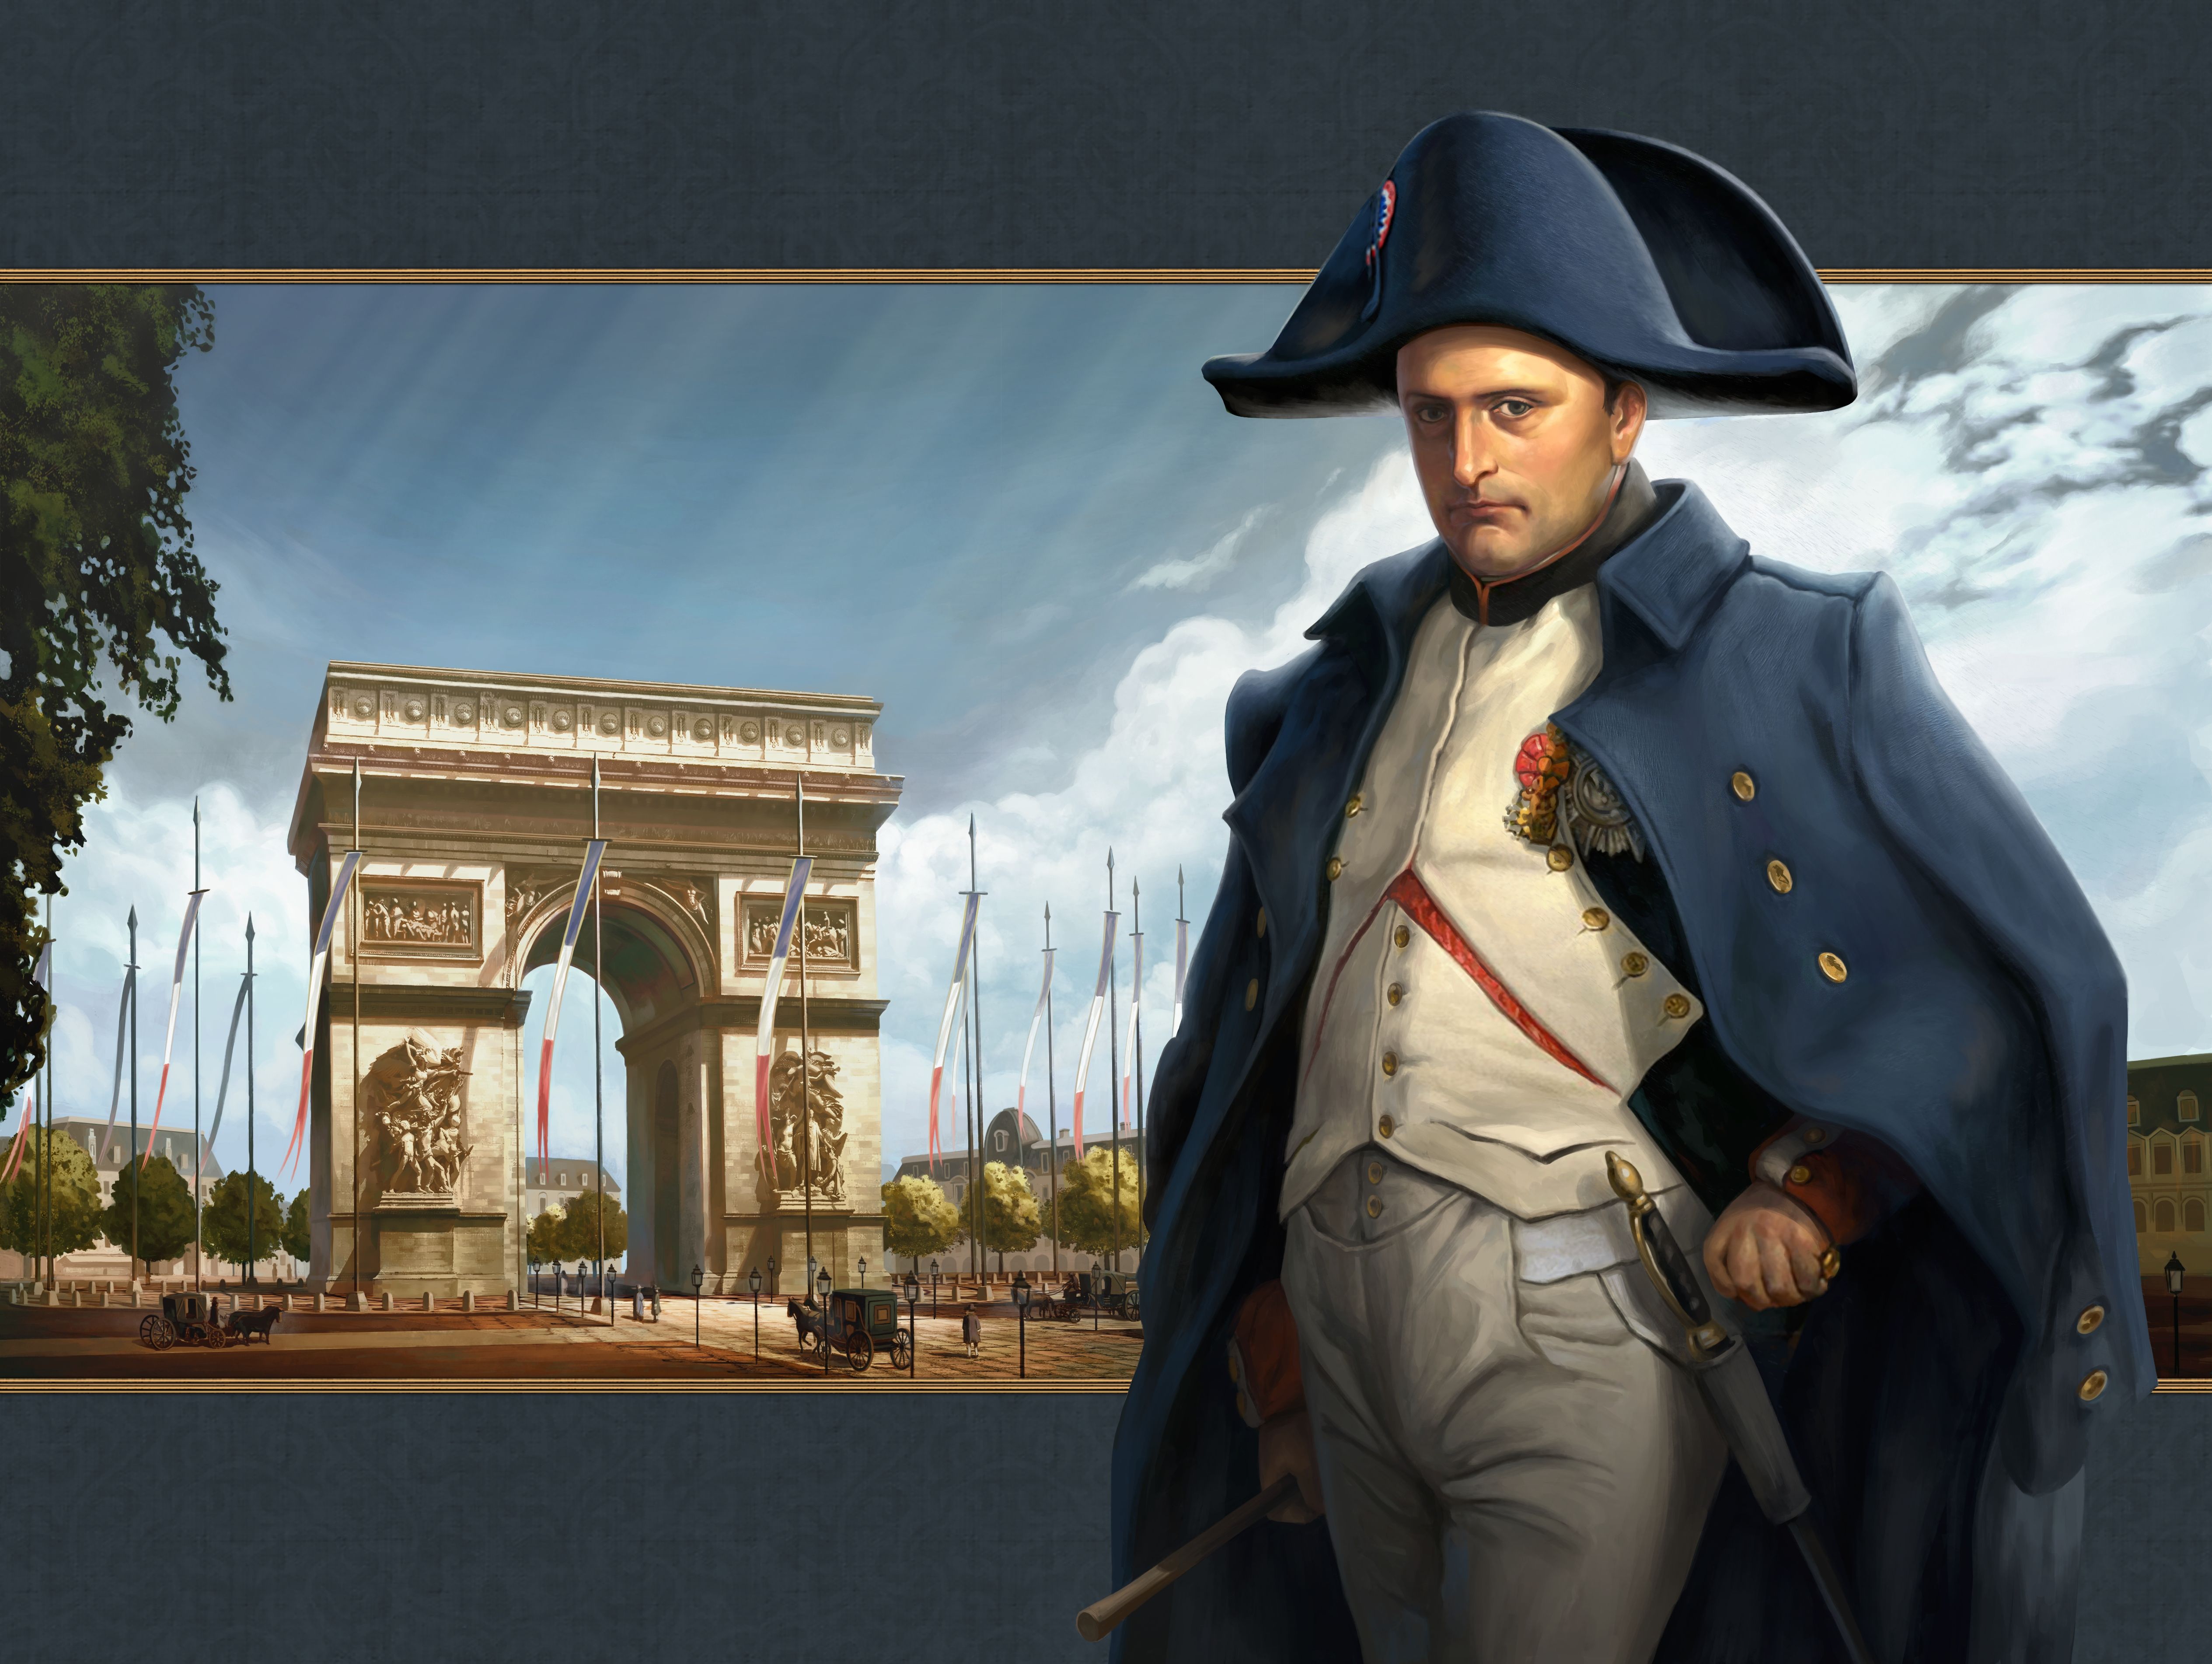 Someone asked in last post if I could get Napoleon for wallpaper. I checked and here is 5058 × 3804px extracted from game files.: eu4